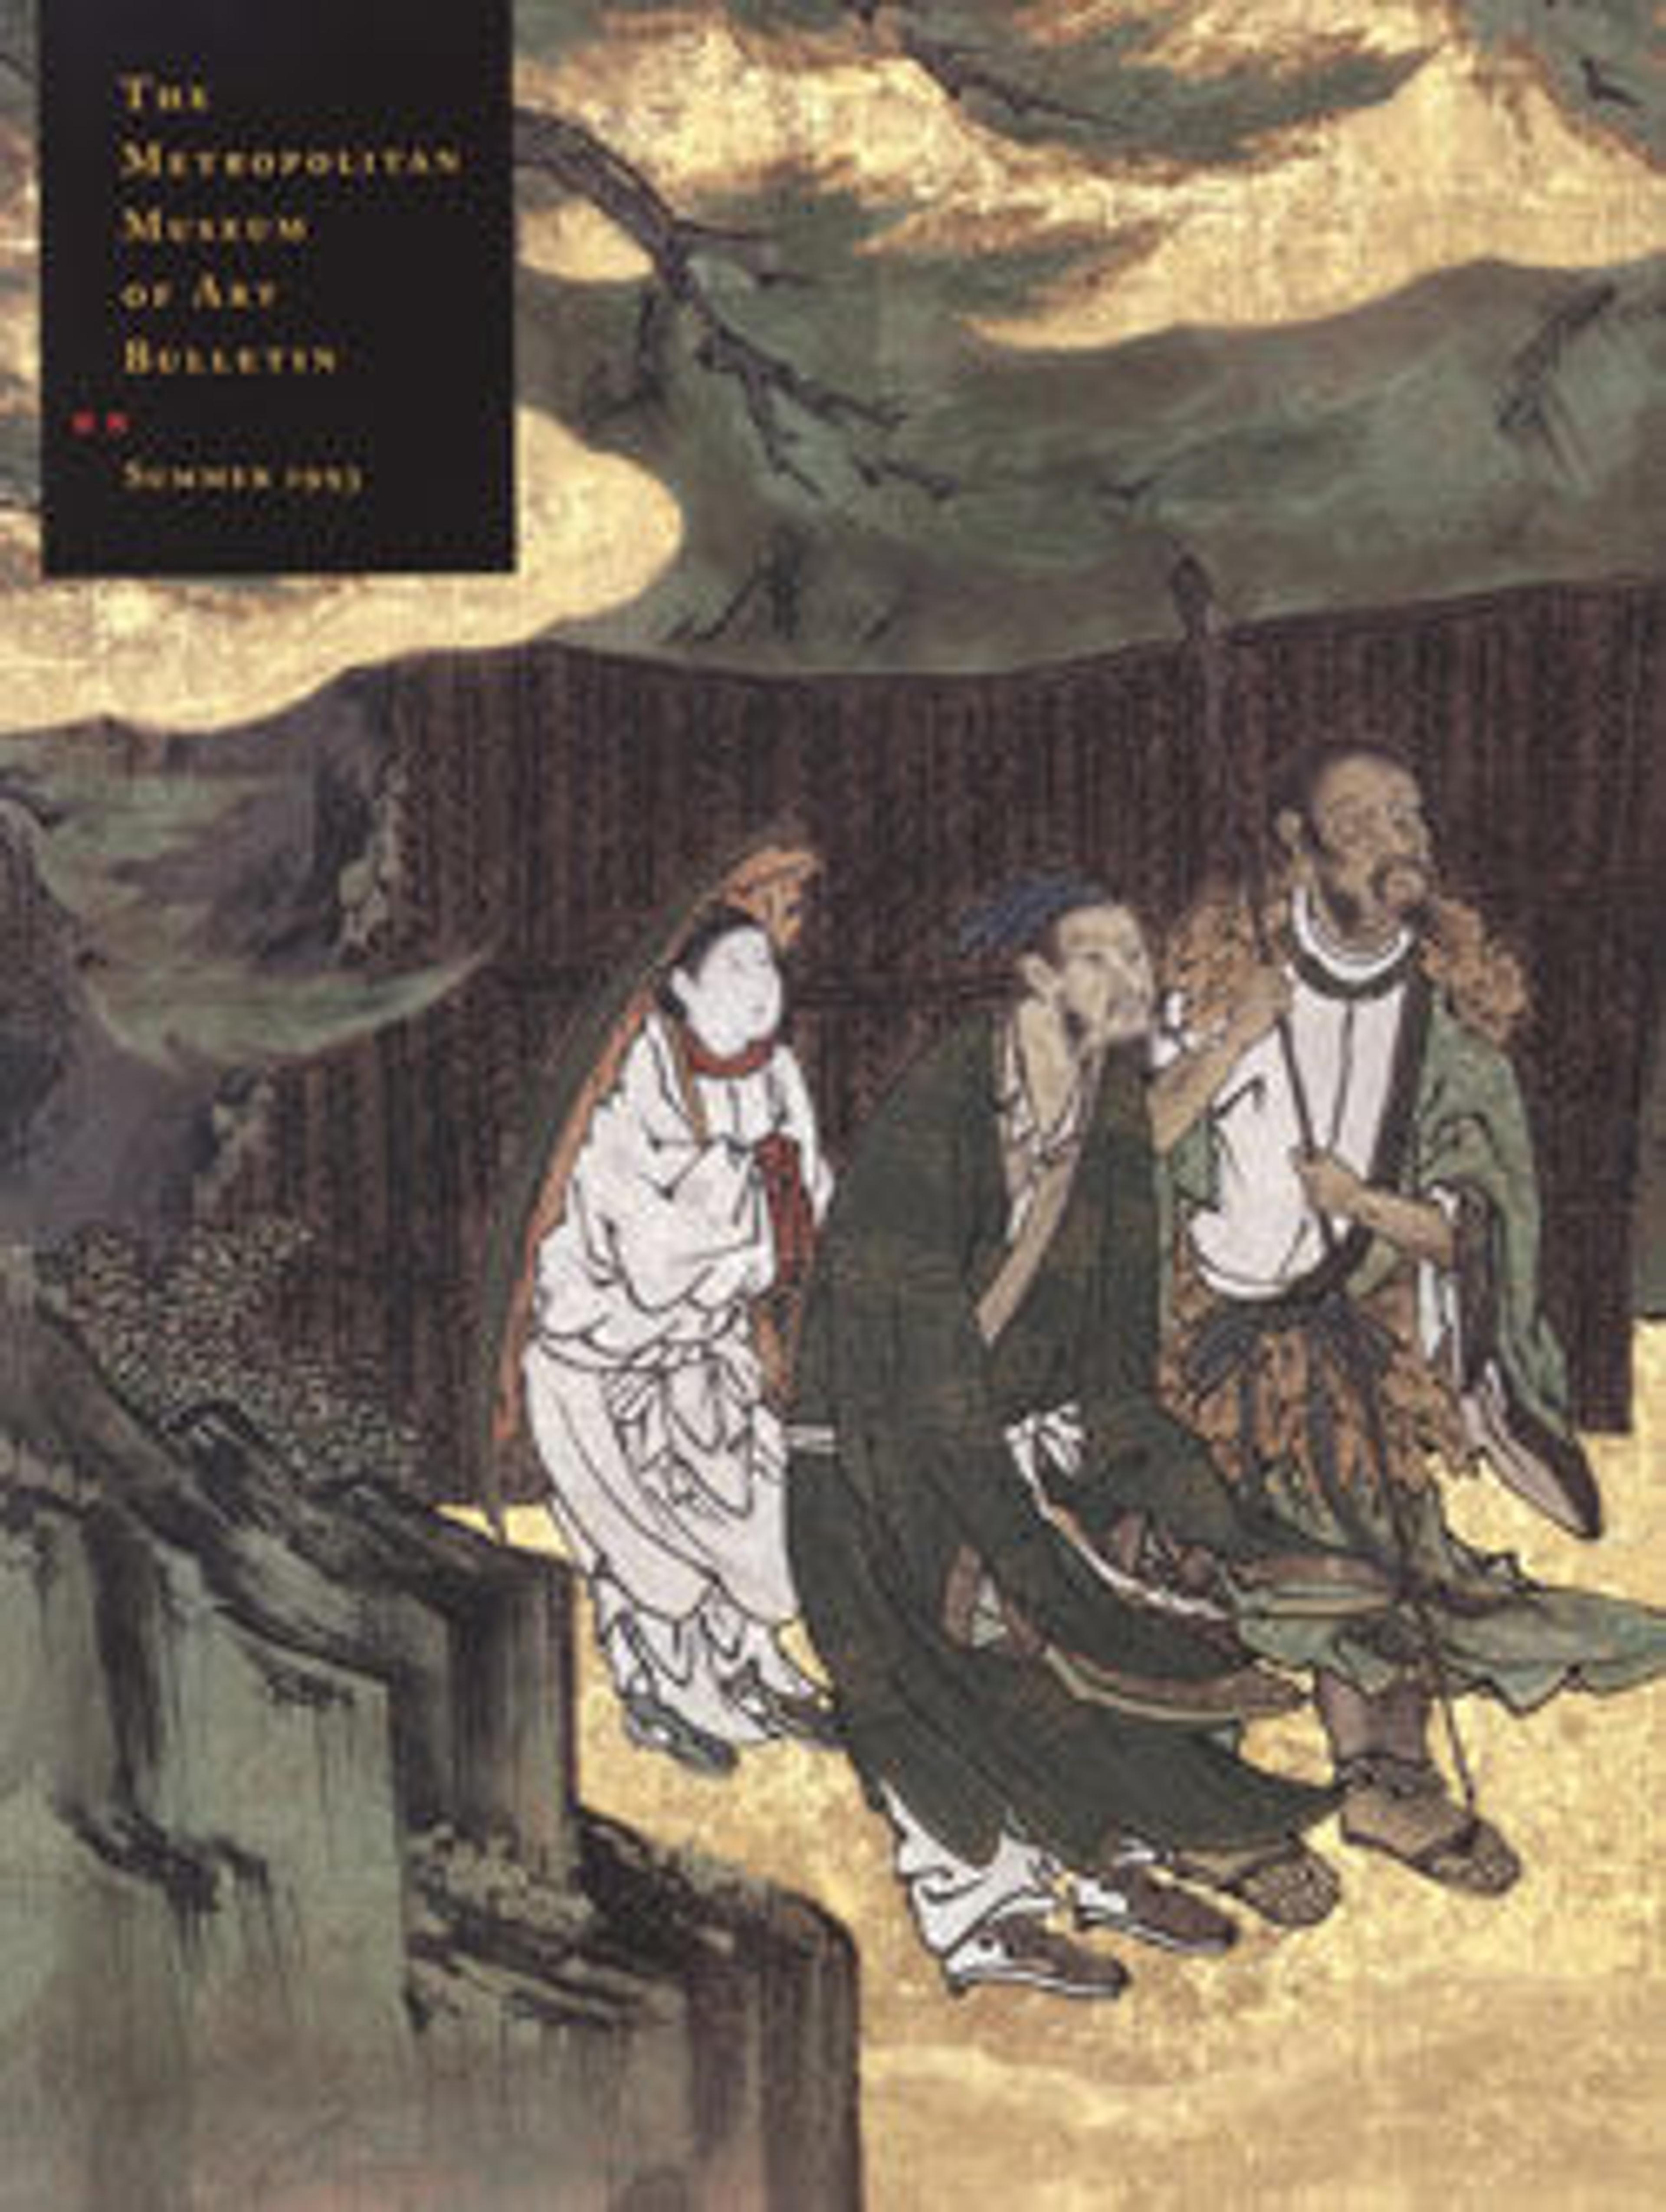 "Immortals and Sages: Paintings from Ryoanji Temple": The Metropolitan Museum of Art Bulletin, v. 51, no. 1 (Summer, 1993)